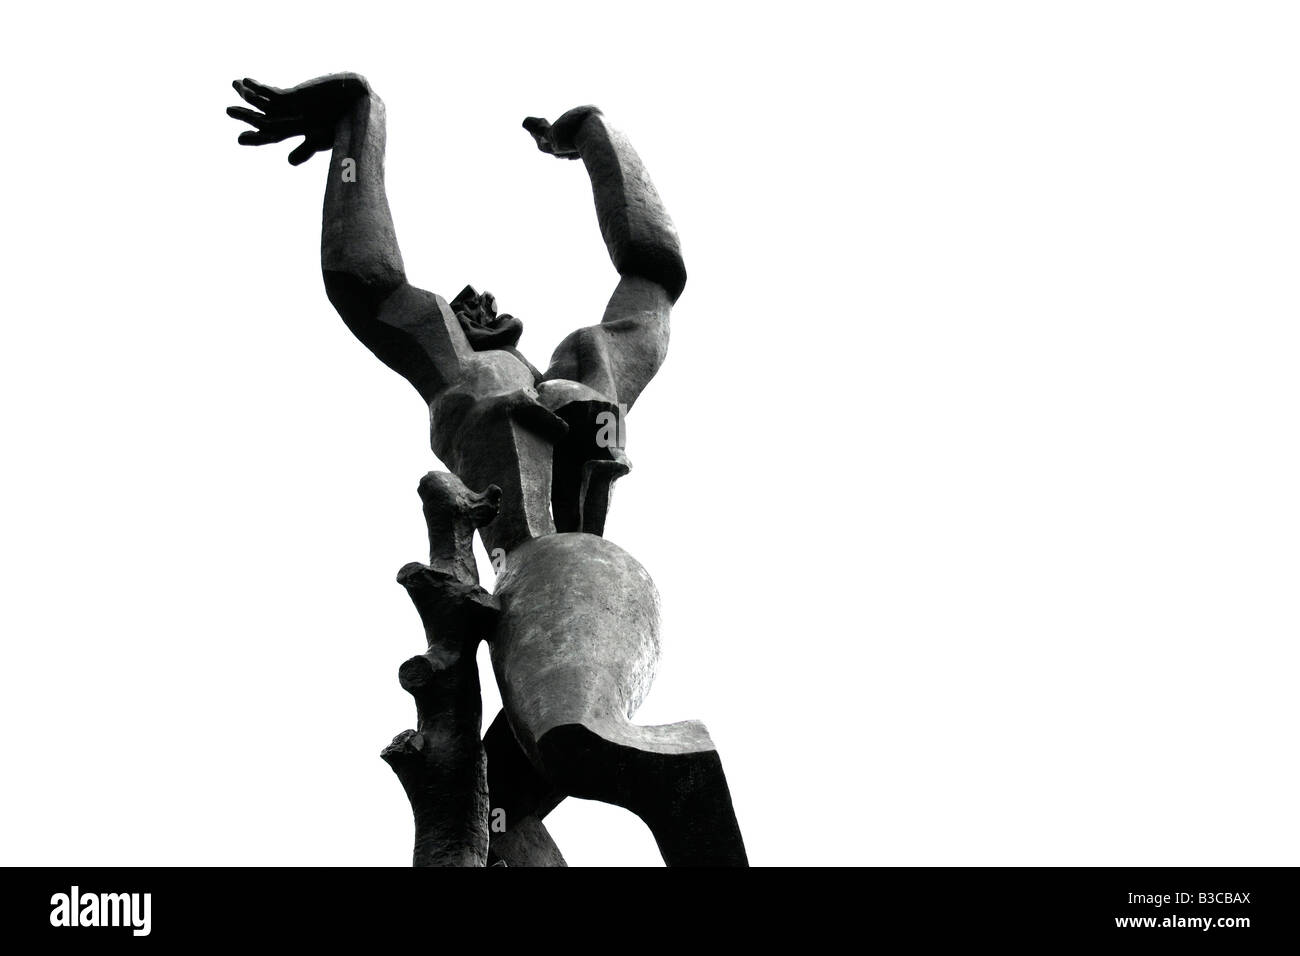 Ossip Zadkine's well-known sculpture 'The Destroyed City' in Rotterdam, Netherlands. Stock Photo